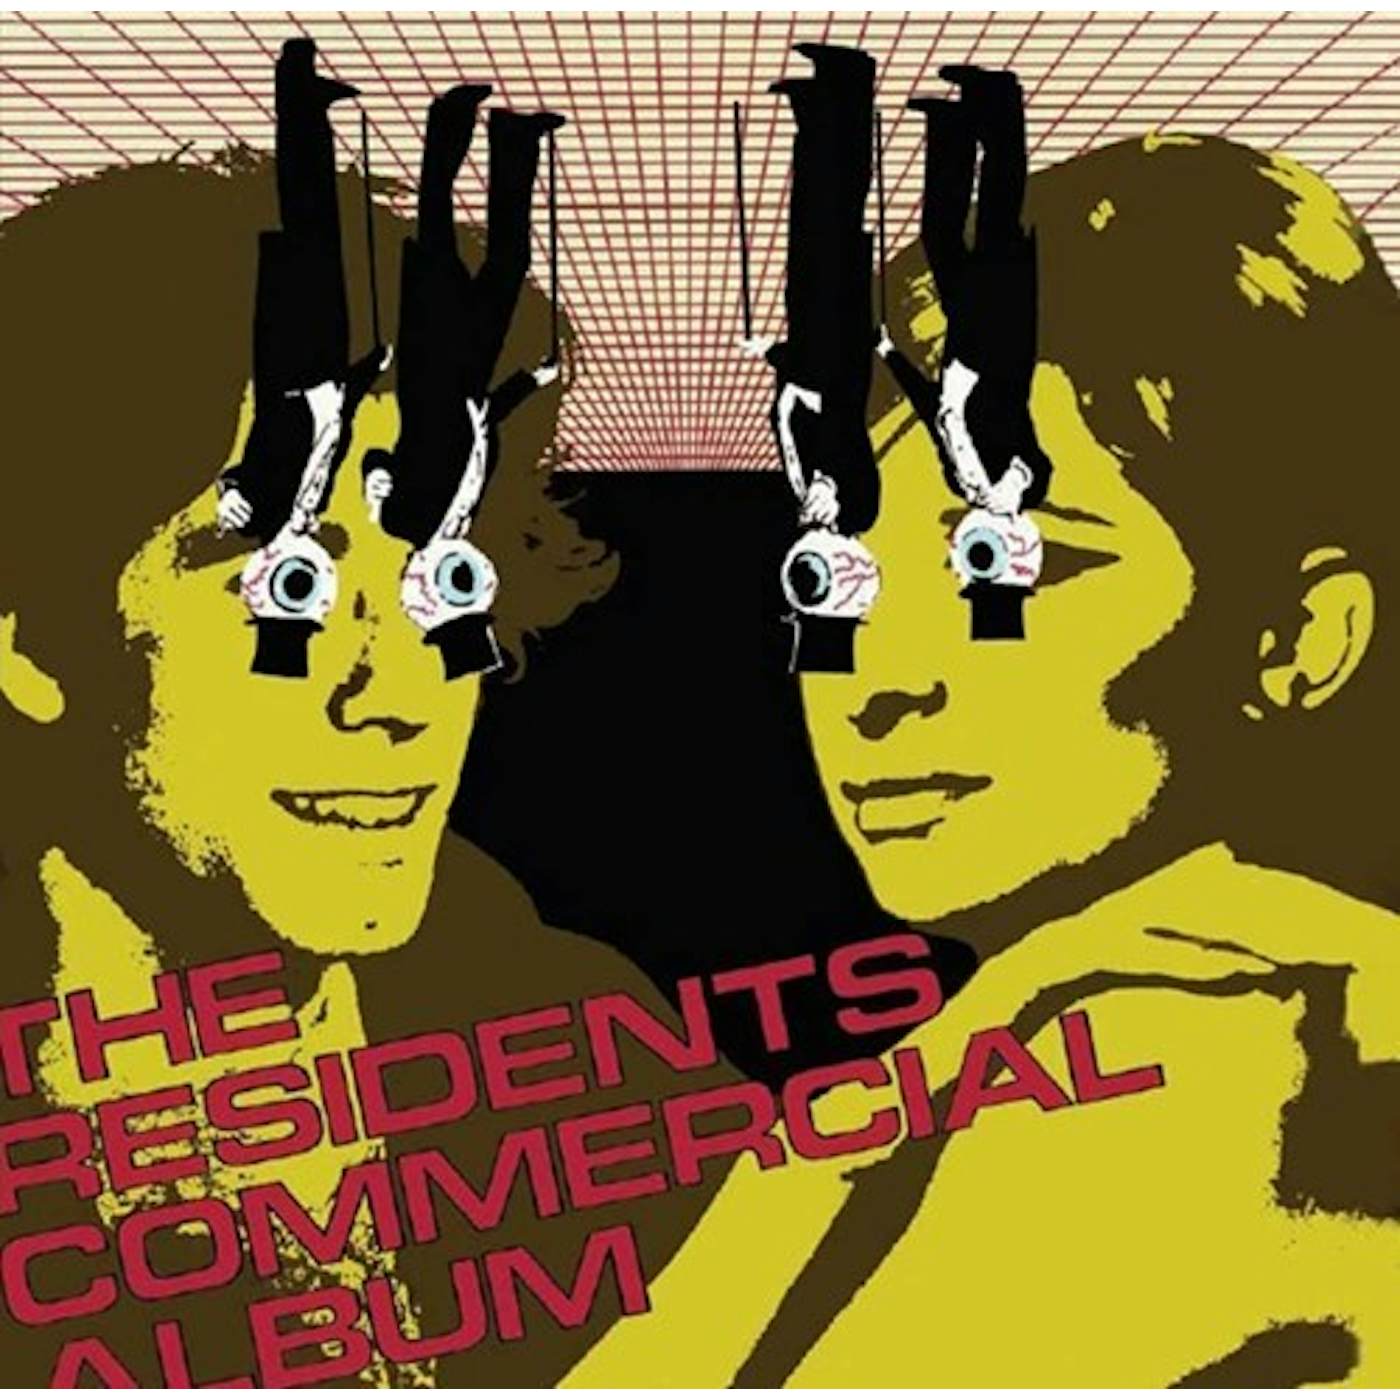 The Residents COMMERCIAL ALBUM (PRESERVED EDITION) CD